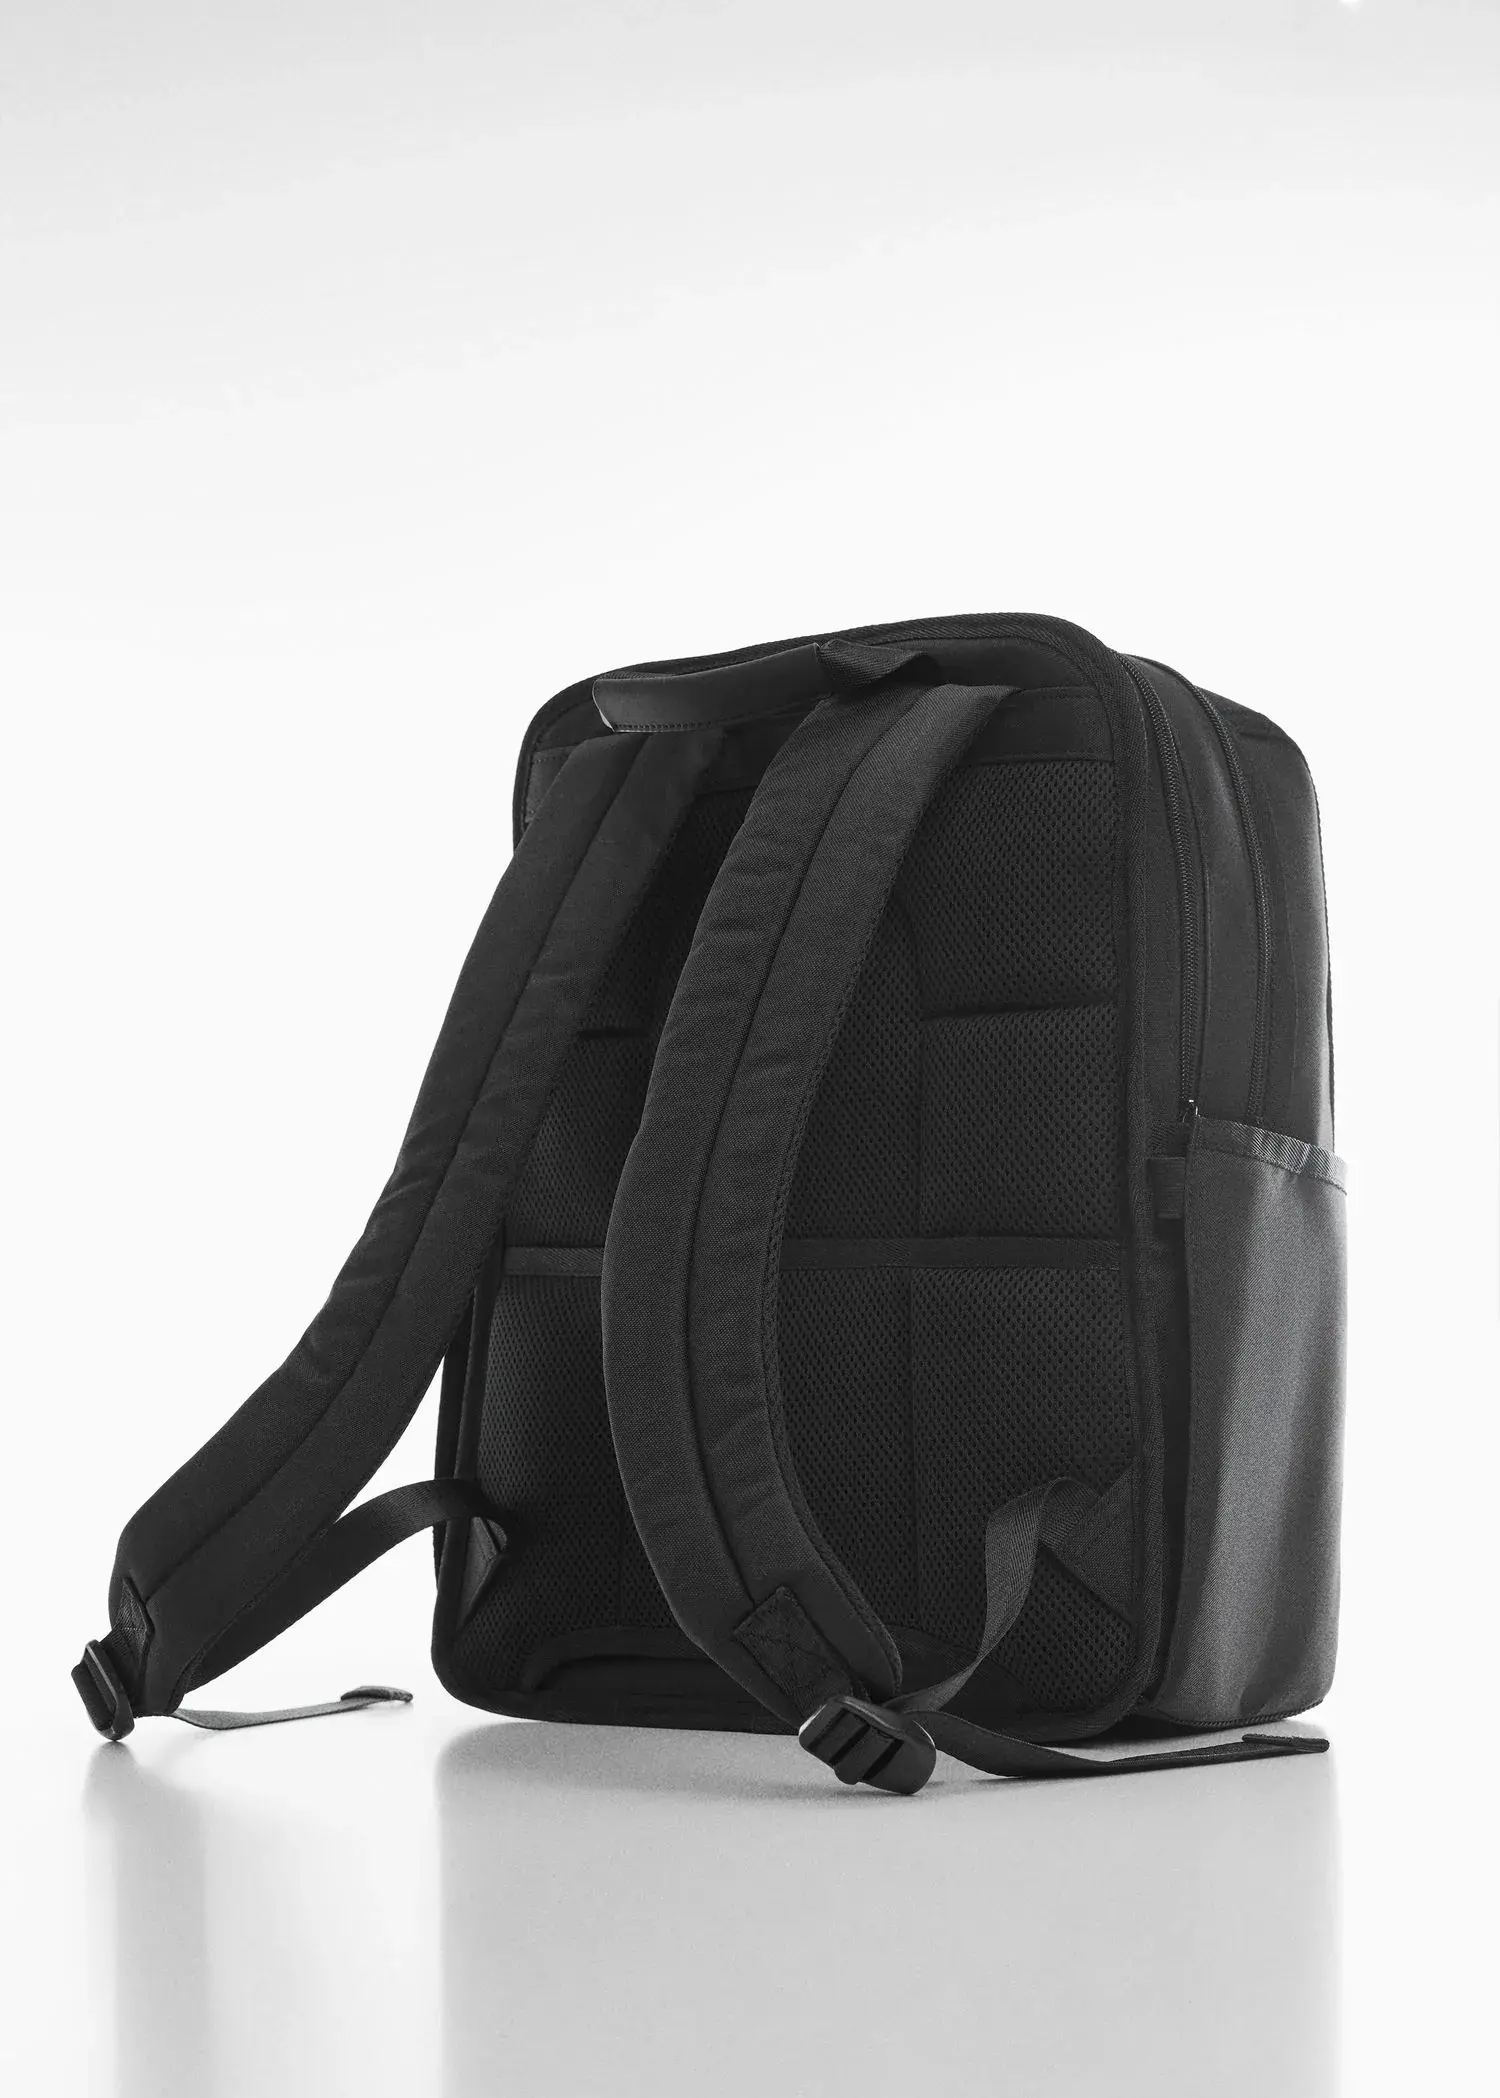 Mango Backpack with leather-effect details. 2